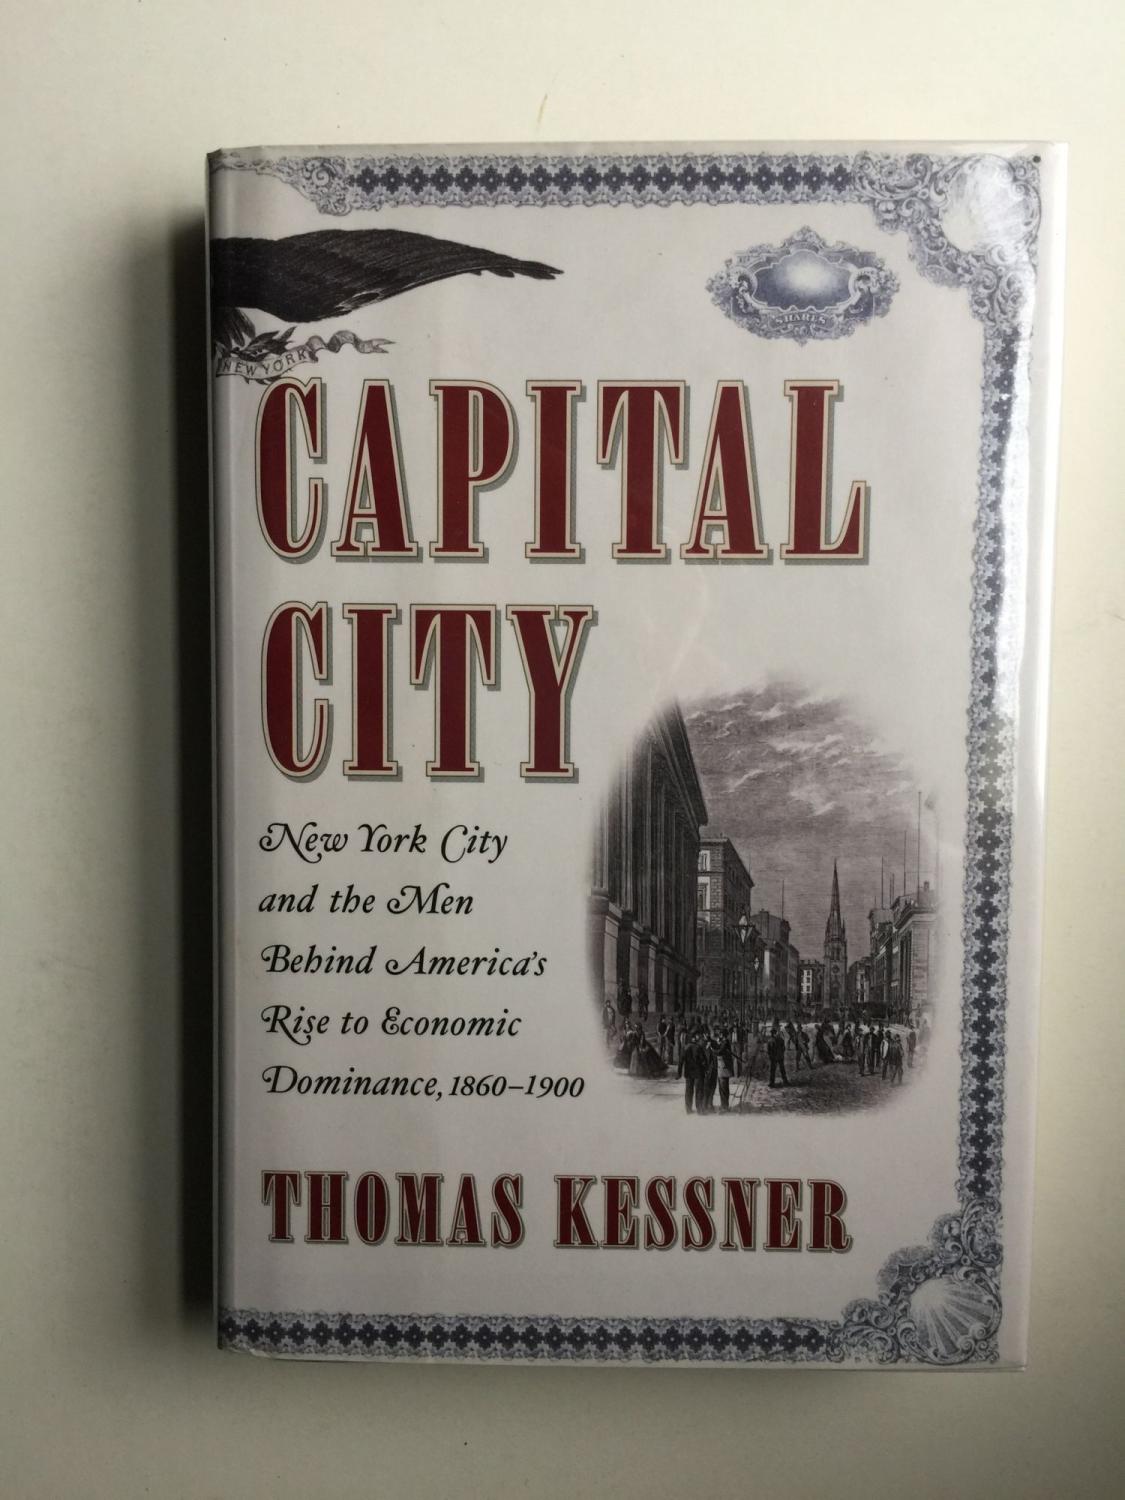 Capital City New York City and the Men Behind America's Rise to Economic Dominance, 1860-1900 - Kessner, Thomas